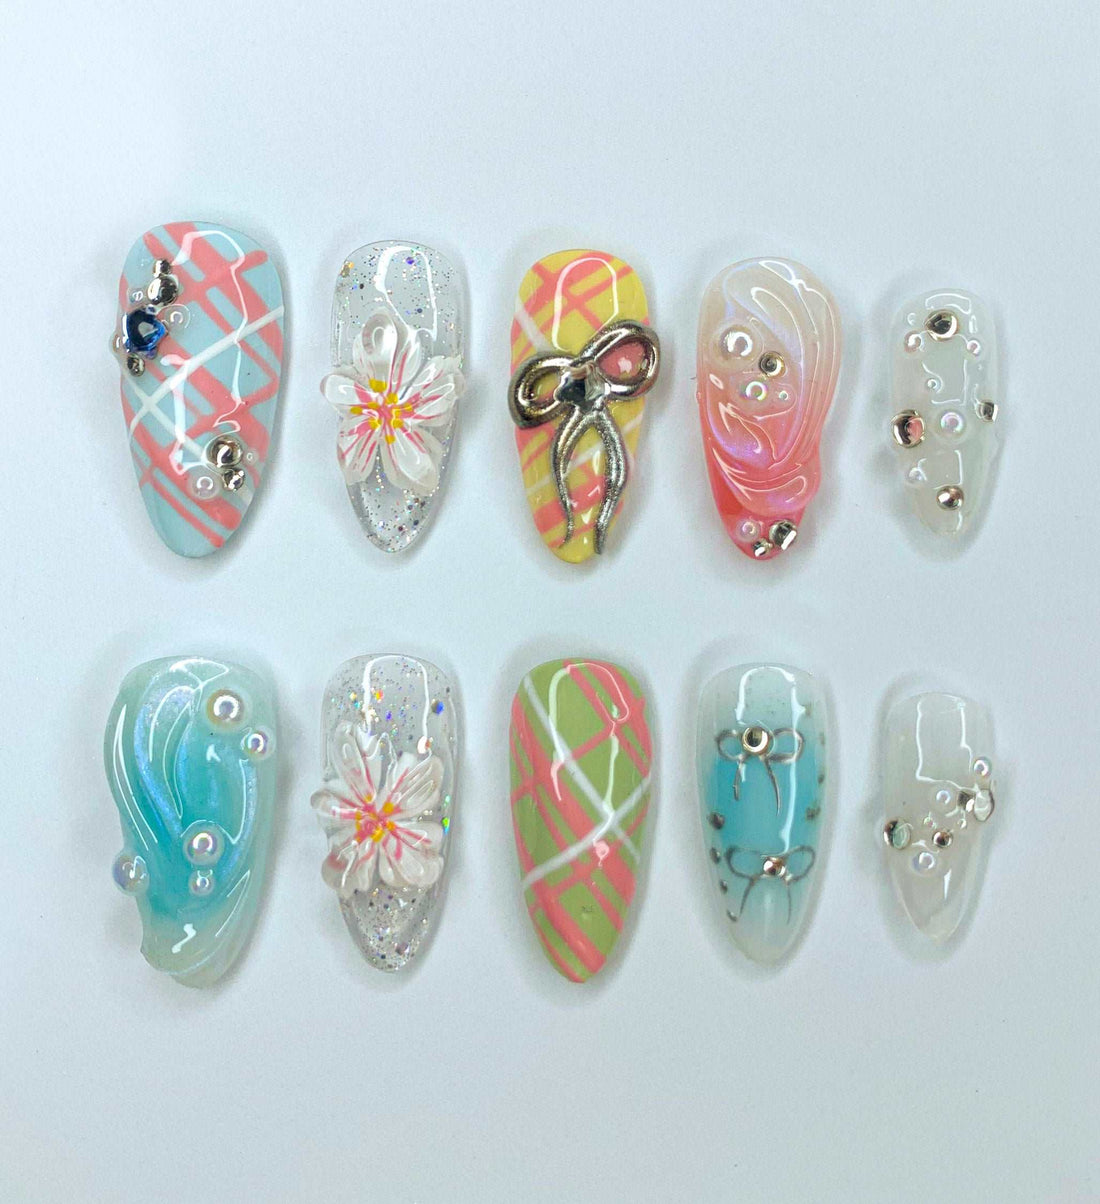 Bow and Flower Pastel Floral Handmade Press On Nails - Summer Colorful Design